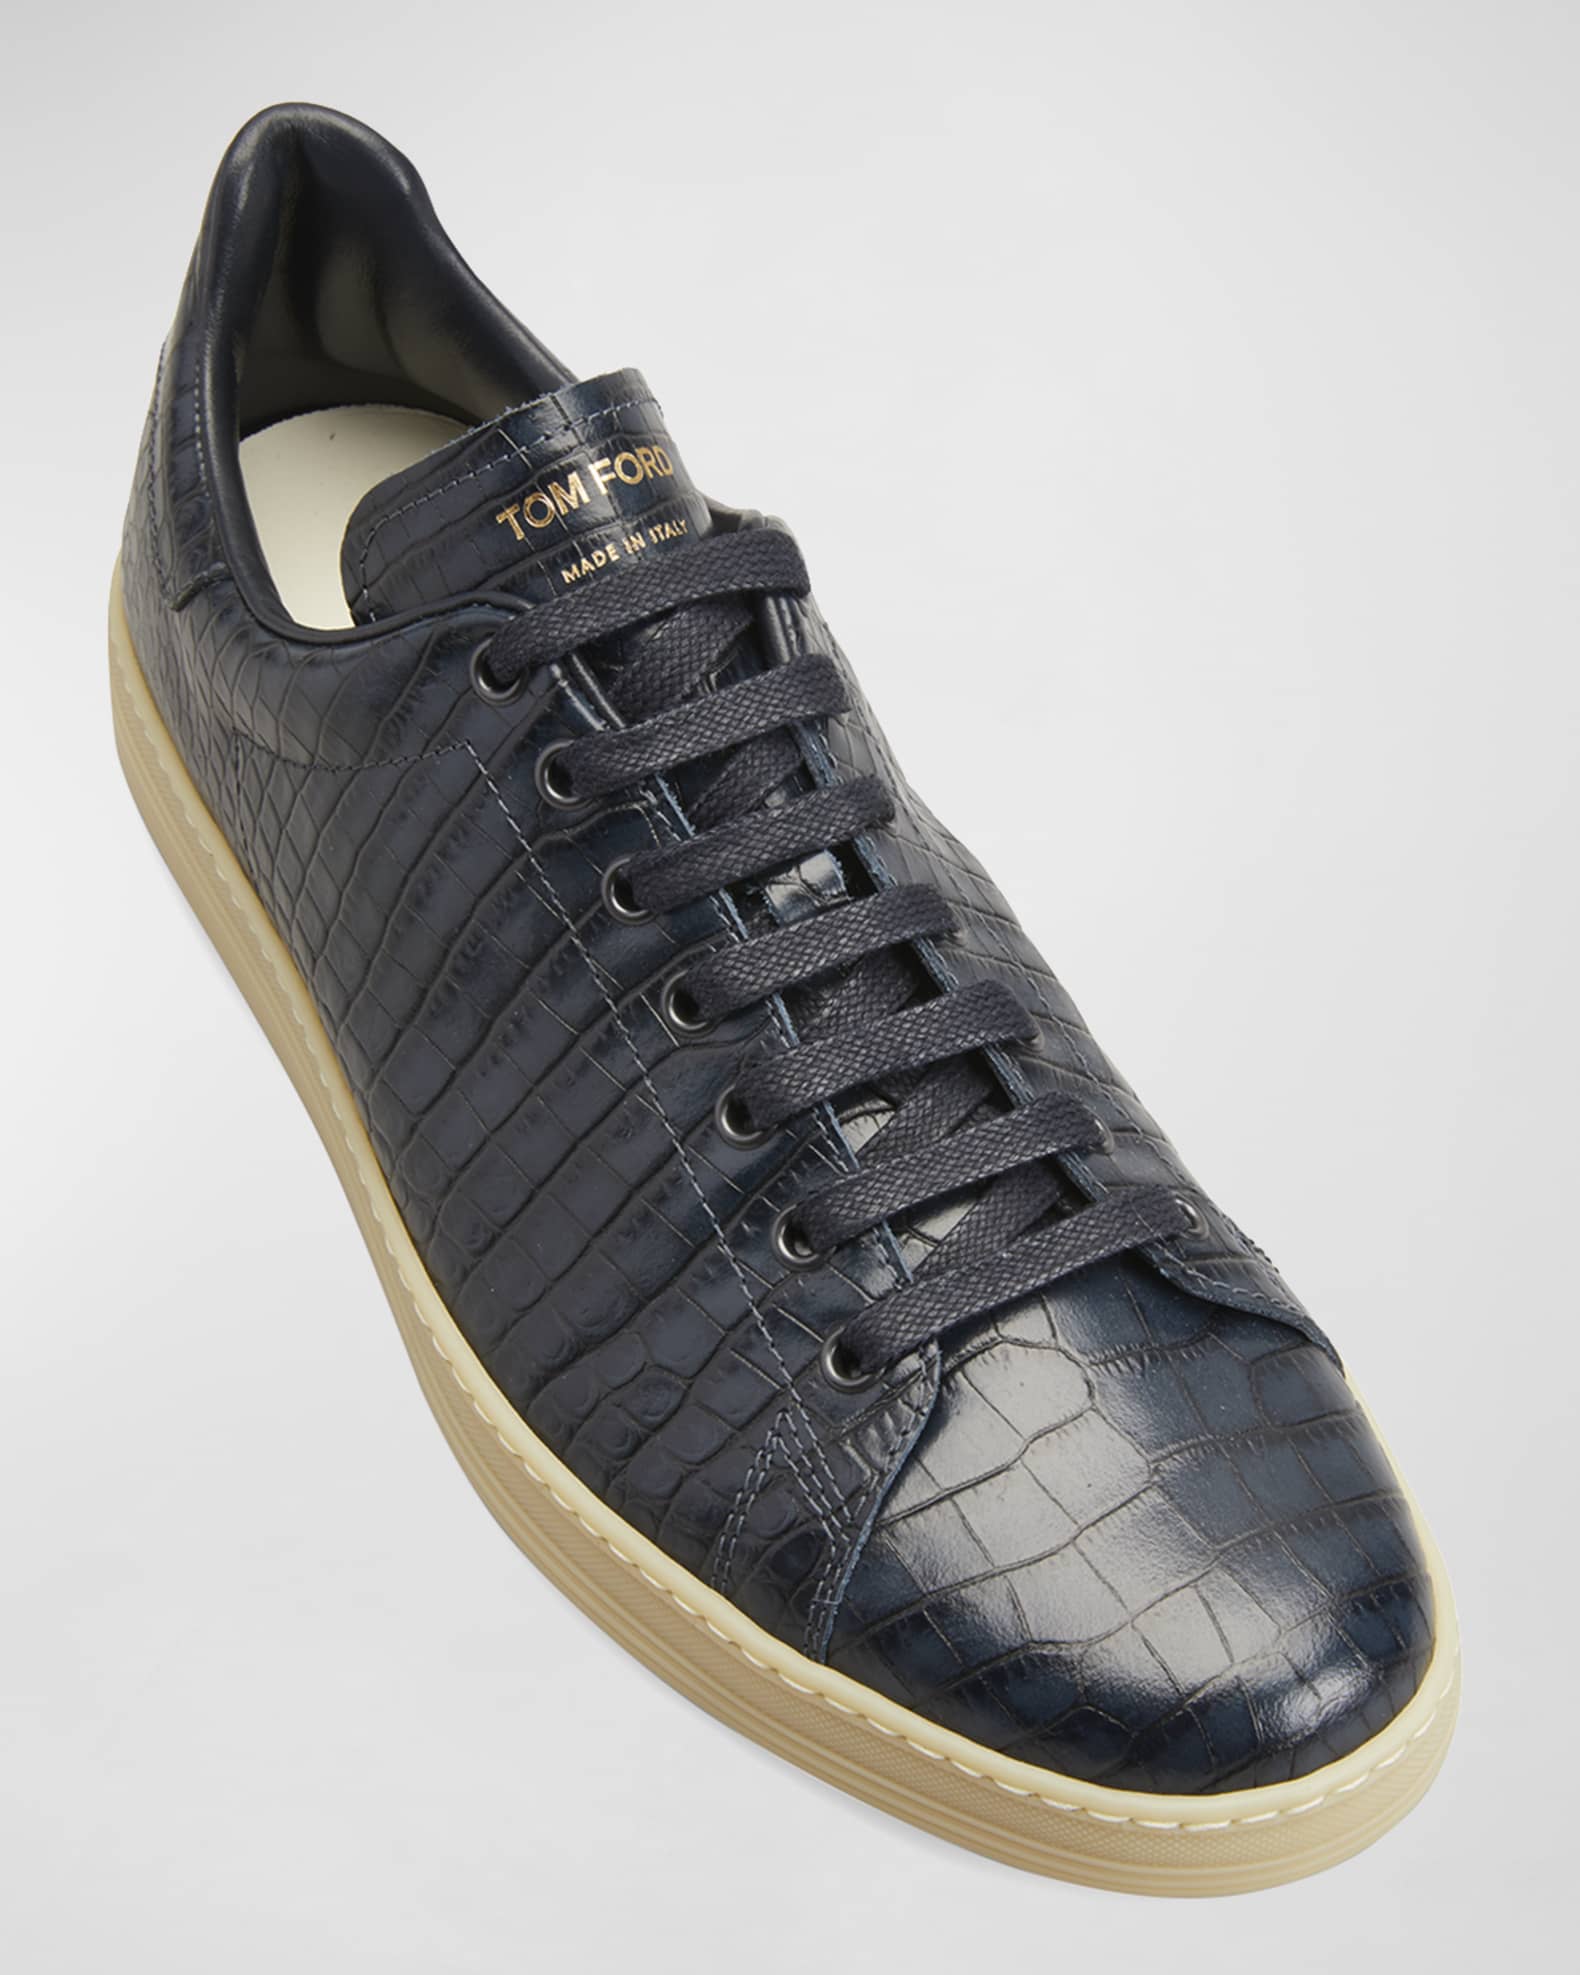 TOM FORD Men's Moc-Croc Leather Low-Top Sneakers | Neiman Marcus